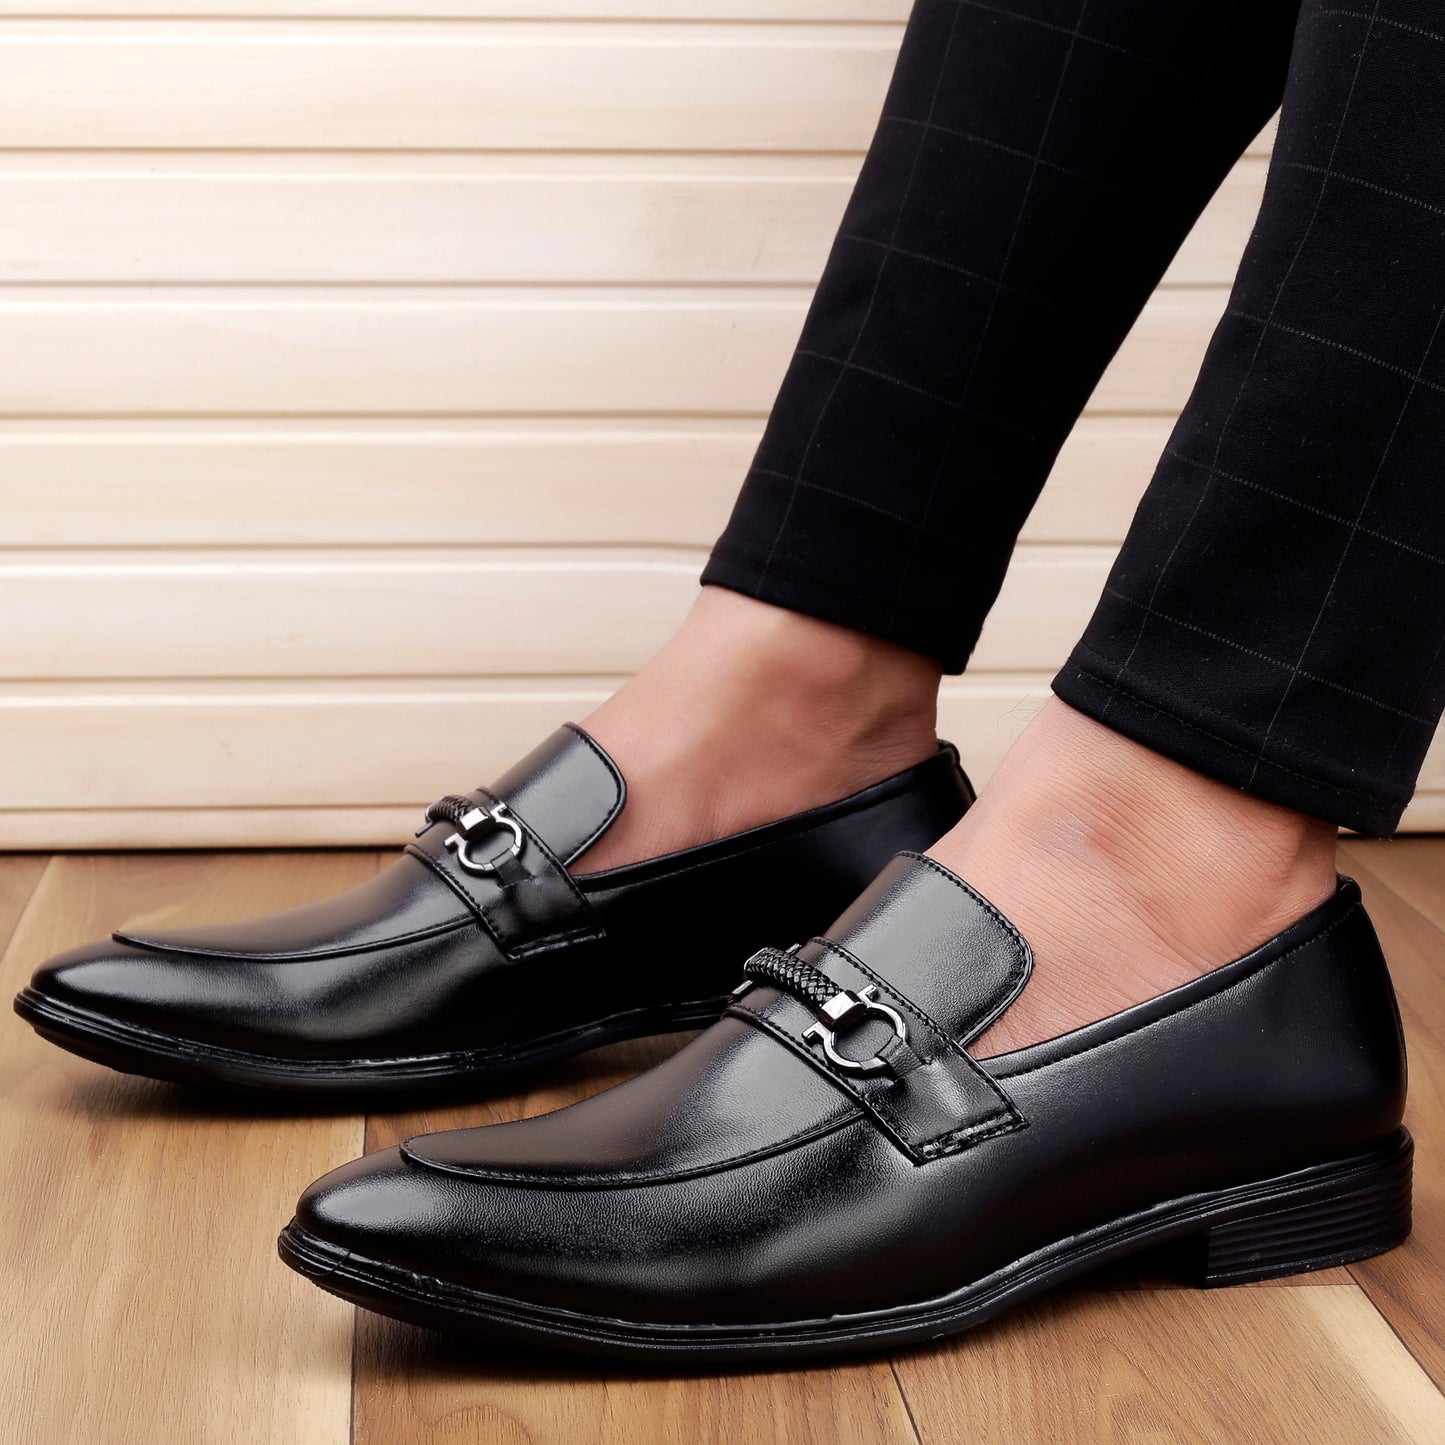 Bxxy's Faux Leather Partywear Slip-ons for Men